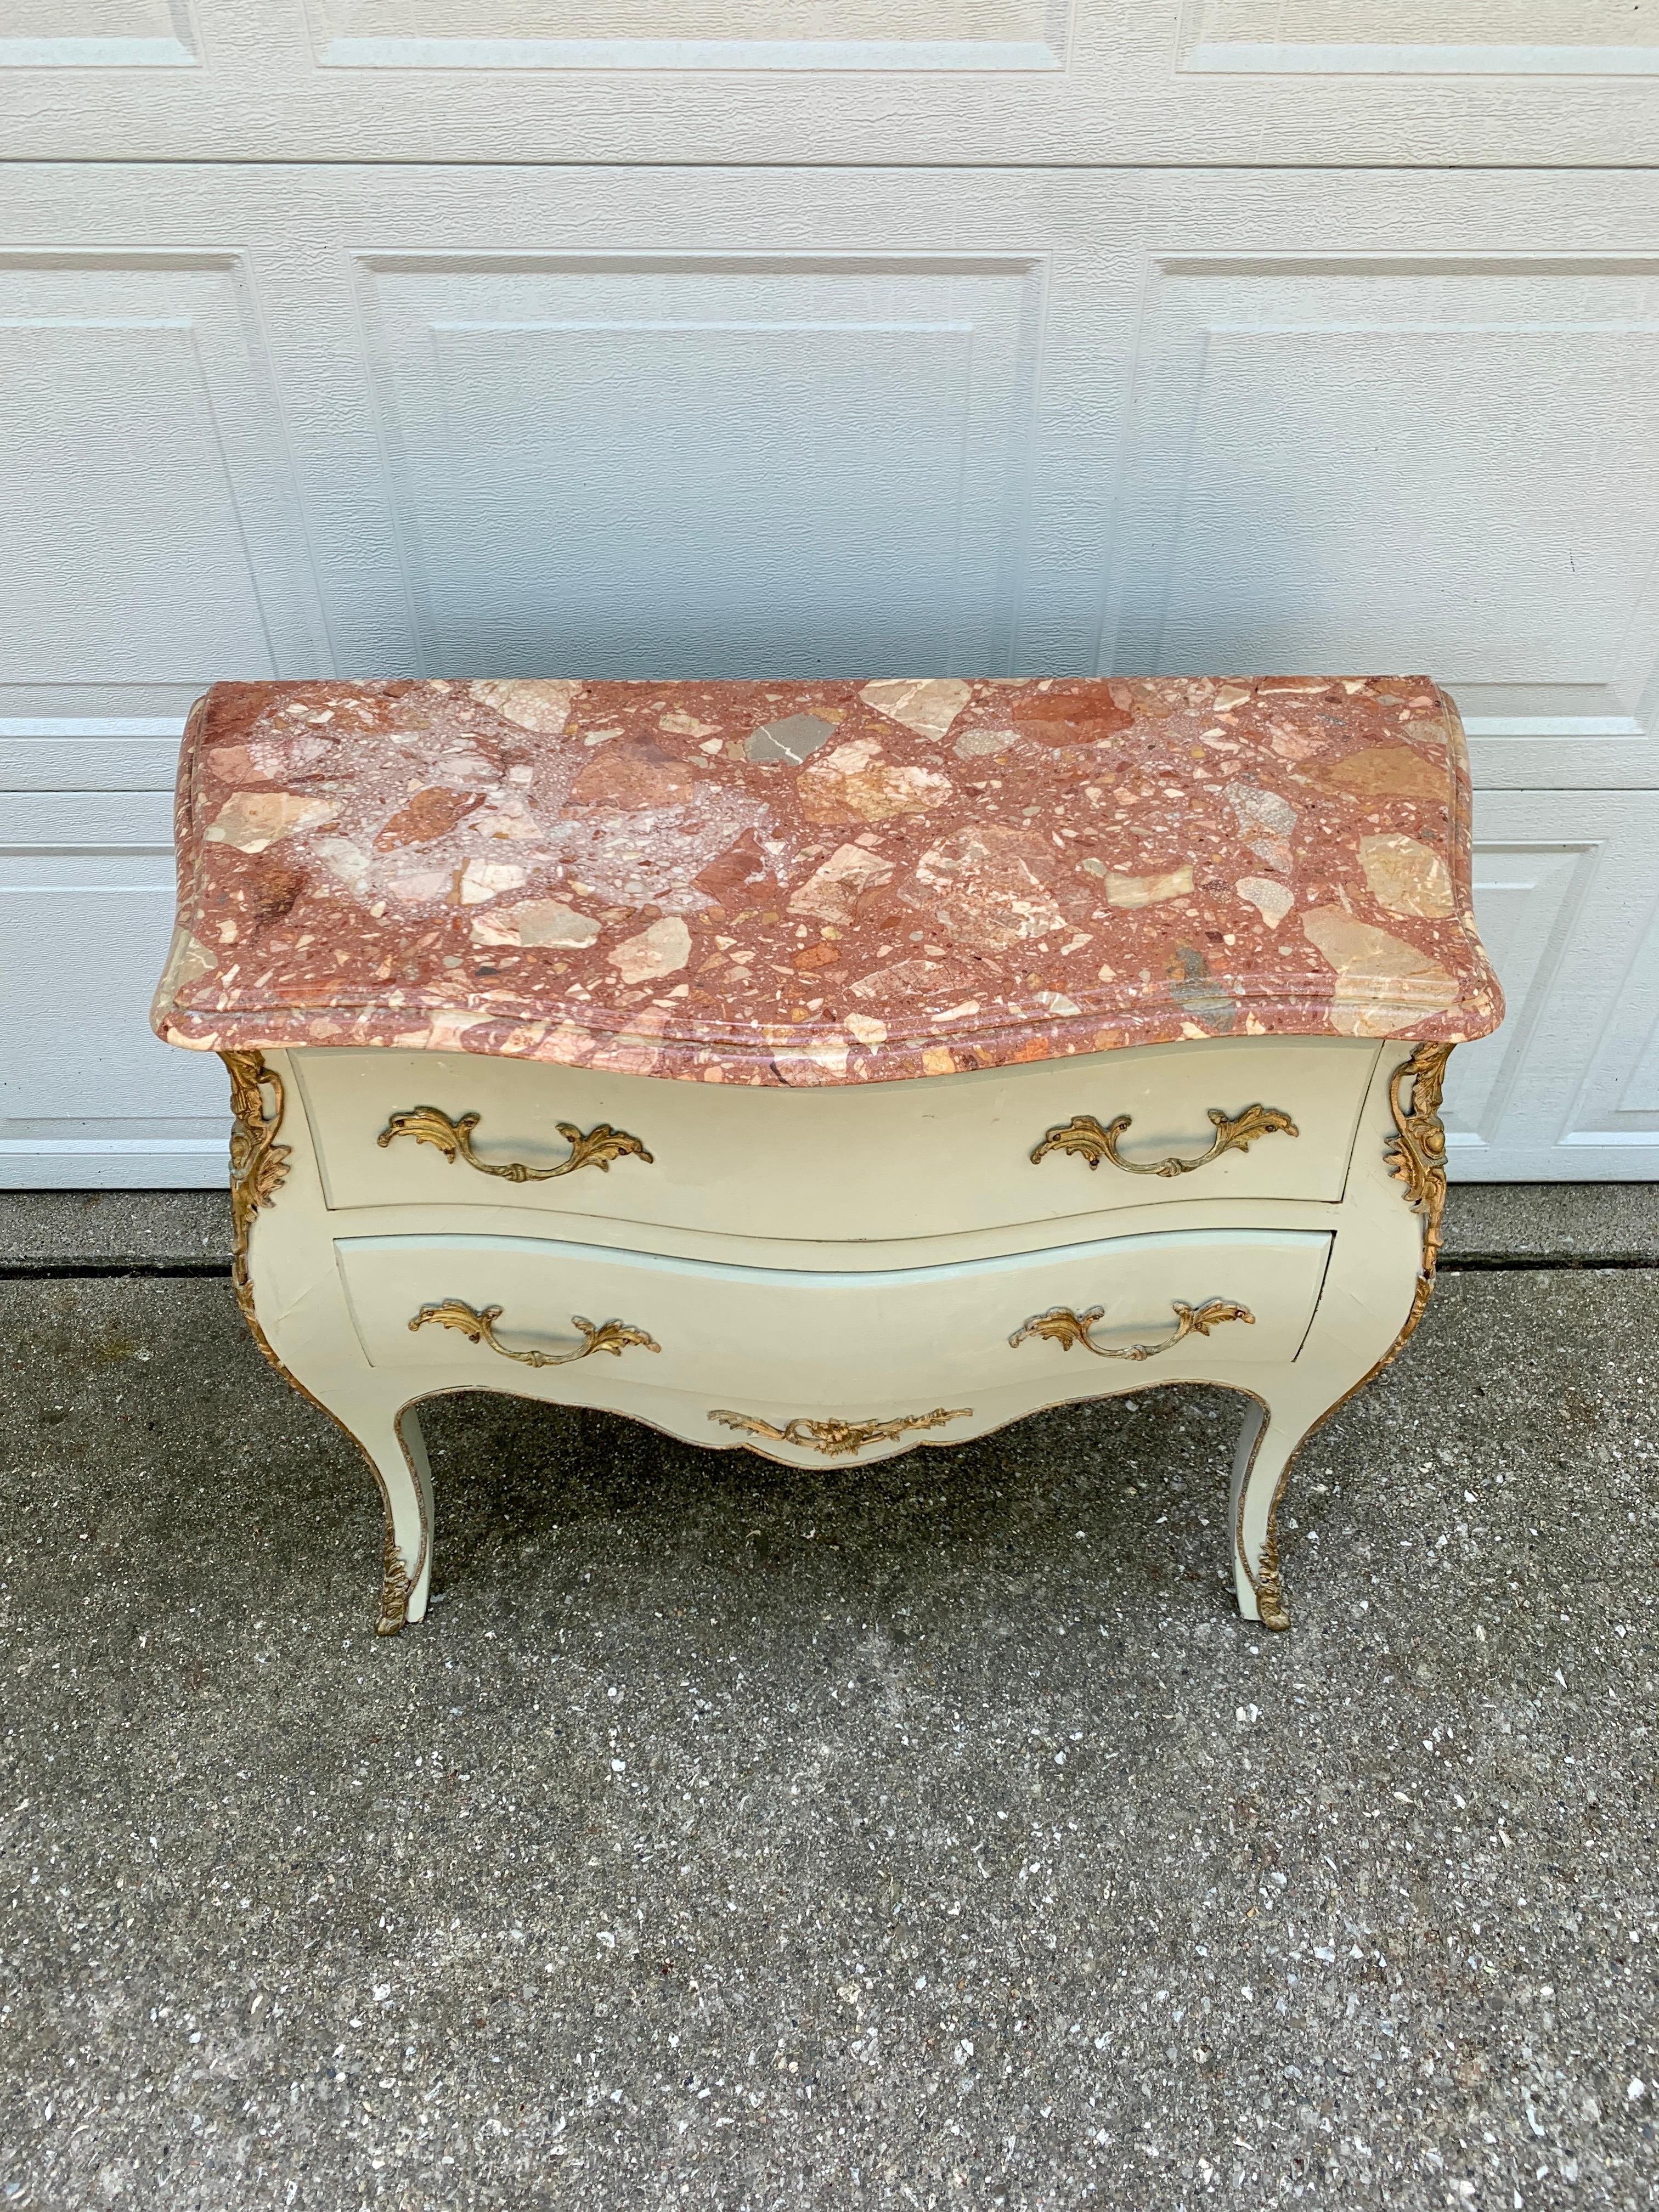 A gorgeous antique French Bombay commode or chest of drawers
France, Early 20th century
Painted wood in a lovely light green color, with mounted bronze ormolu, and beveled pink, red, and tan marble top.
Measures: 37.75? W x 16 D x 30.75 H.
Good